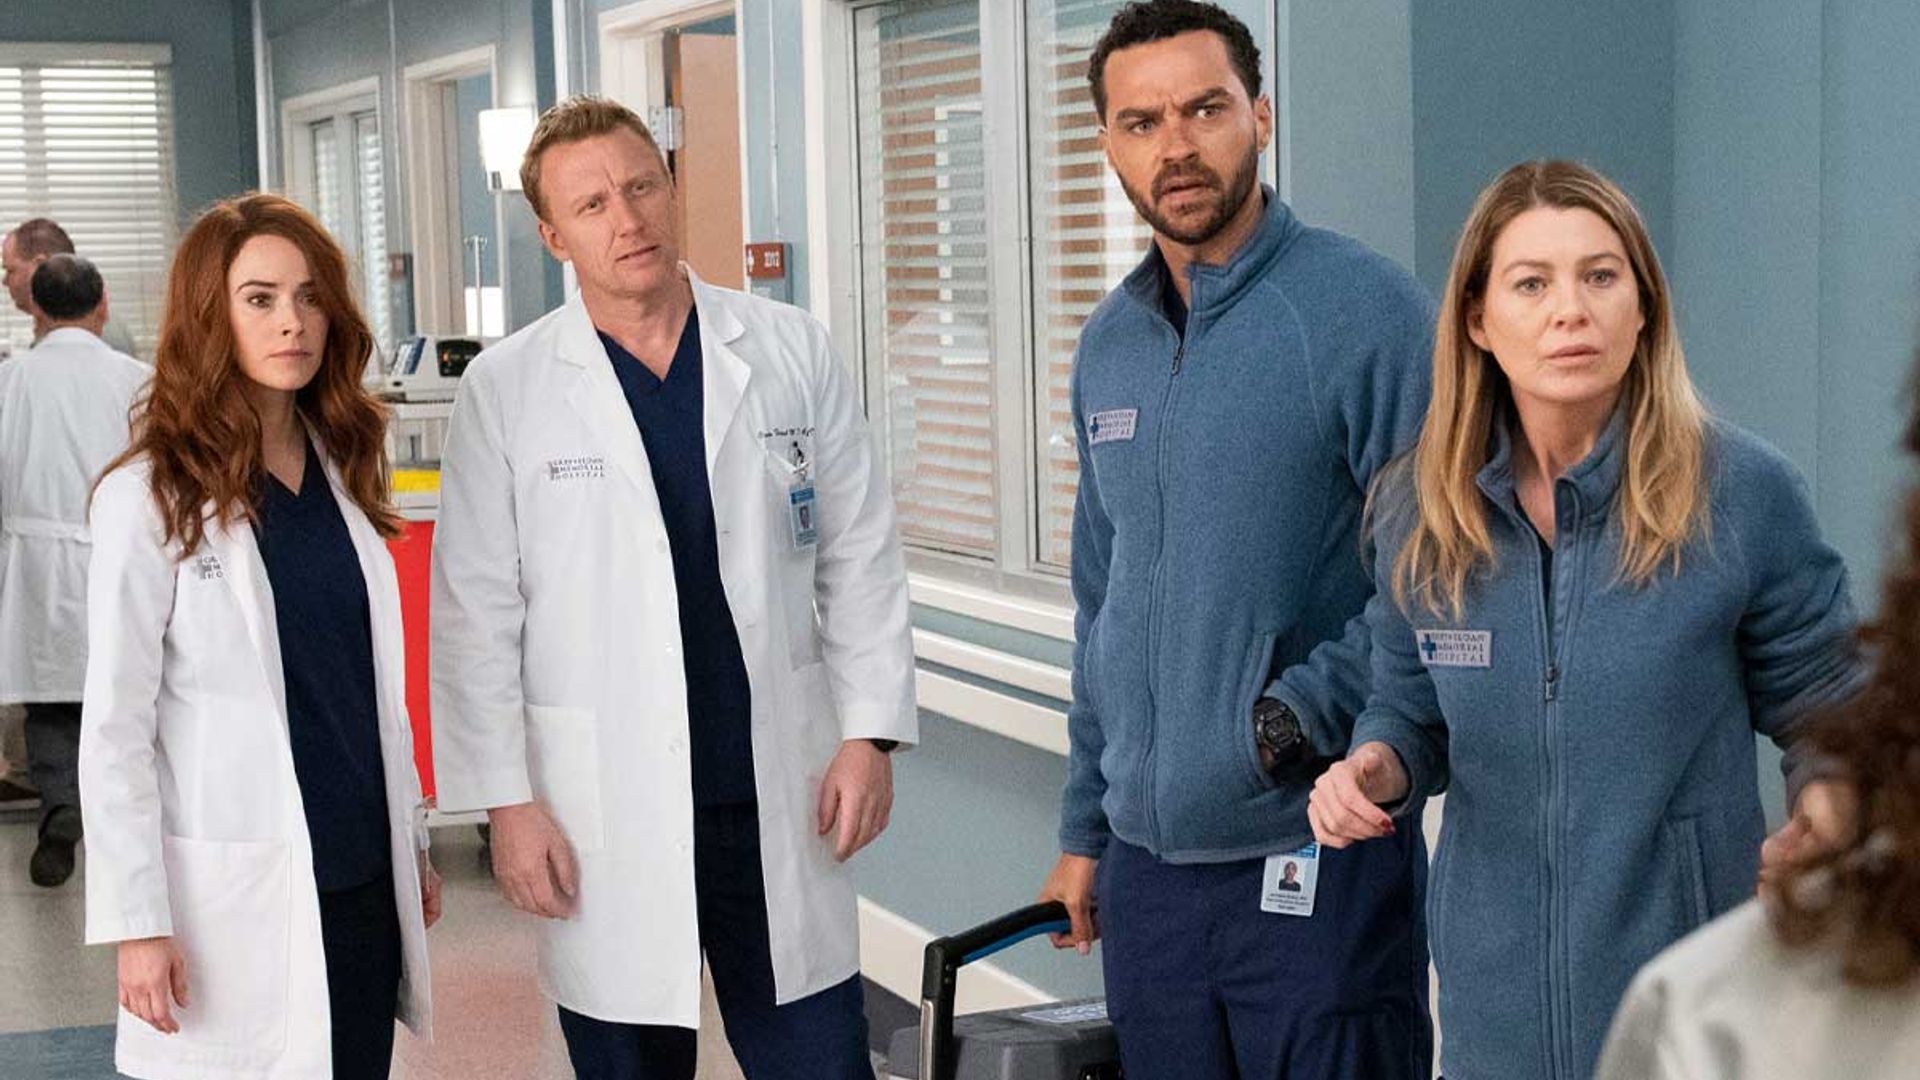 Grey's Anatomy star lands new role away from show amid exit rumors